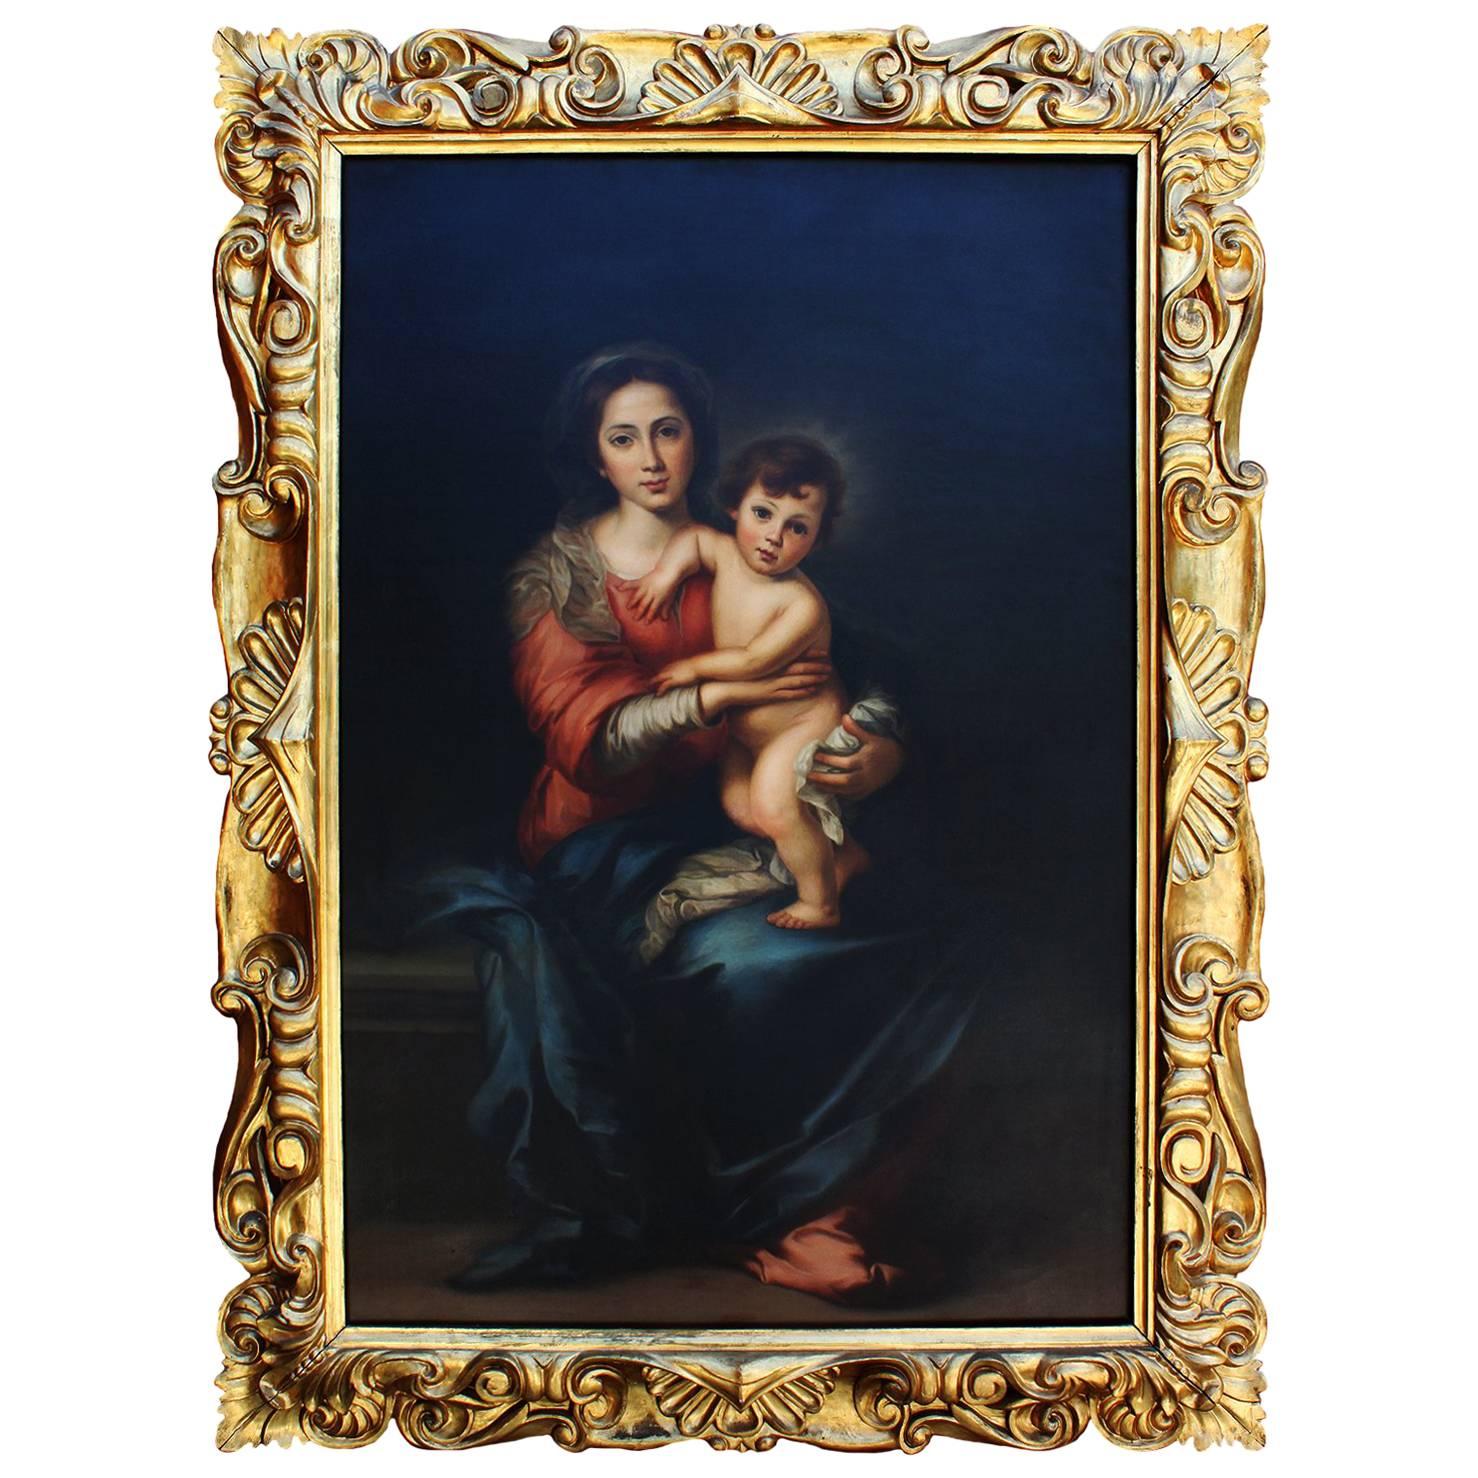 Attributed to Giorgio Lucchesi, Oil on Canvas "Madonna & Child" After Murillo